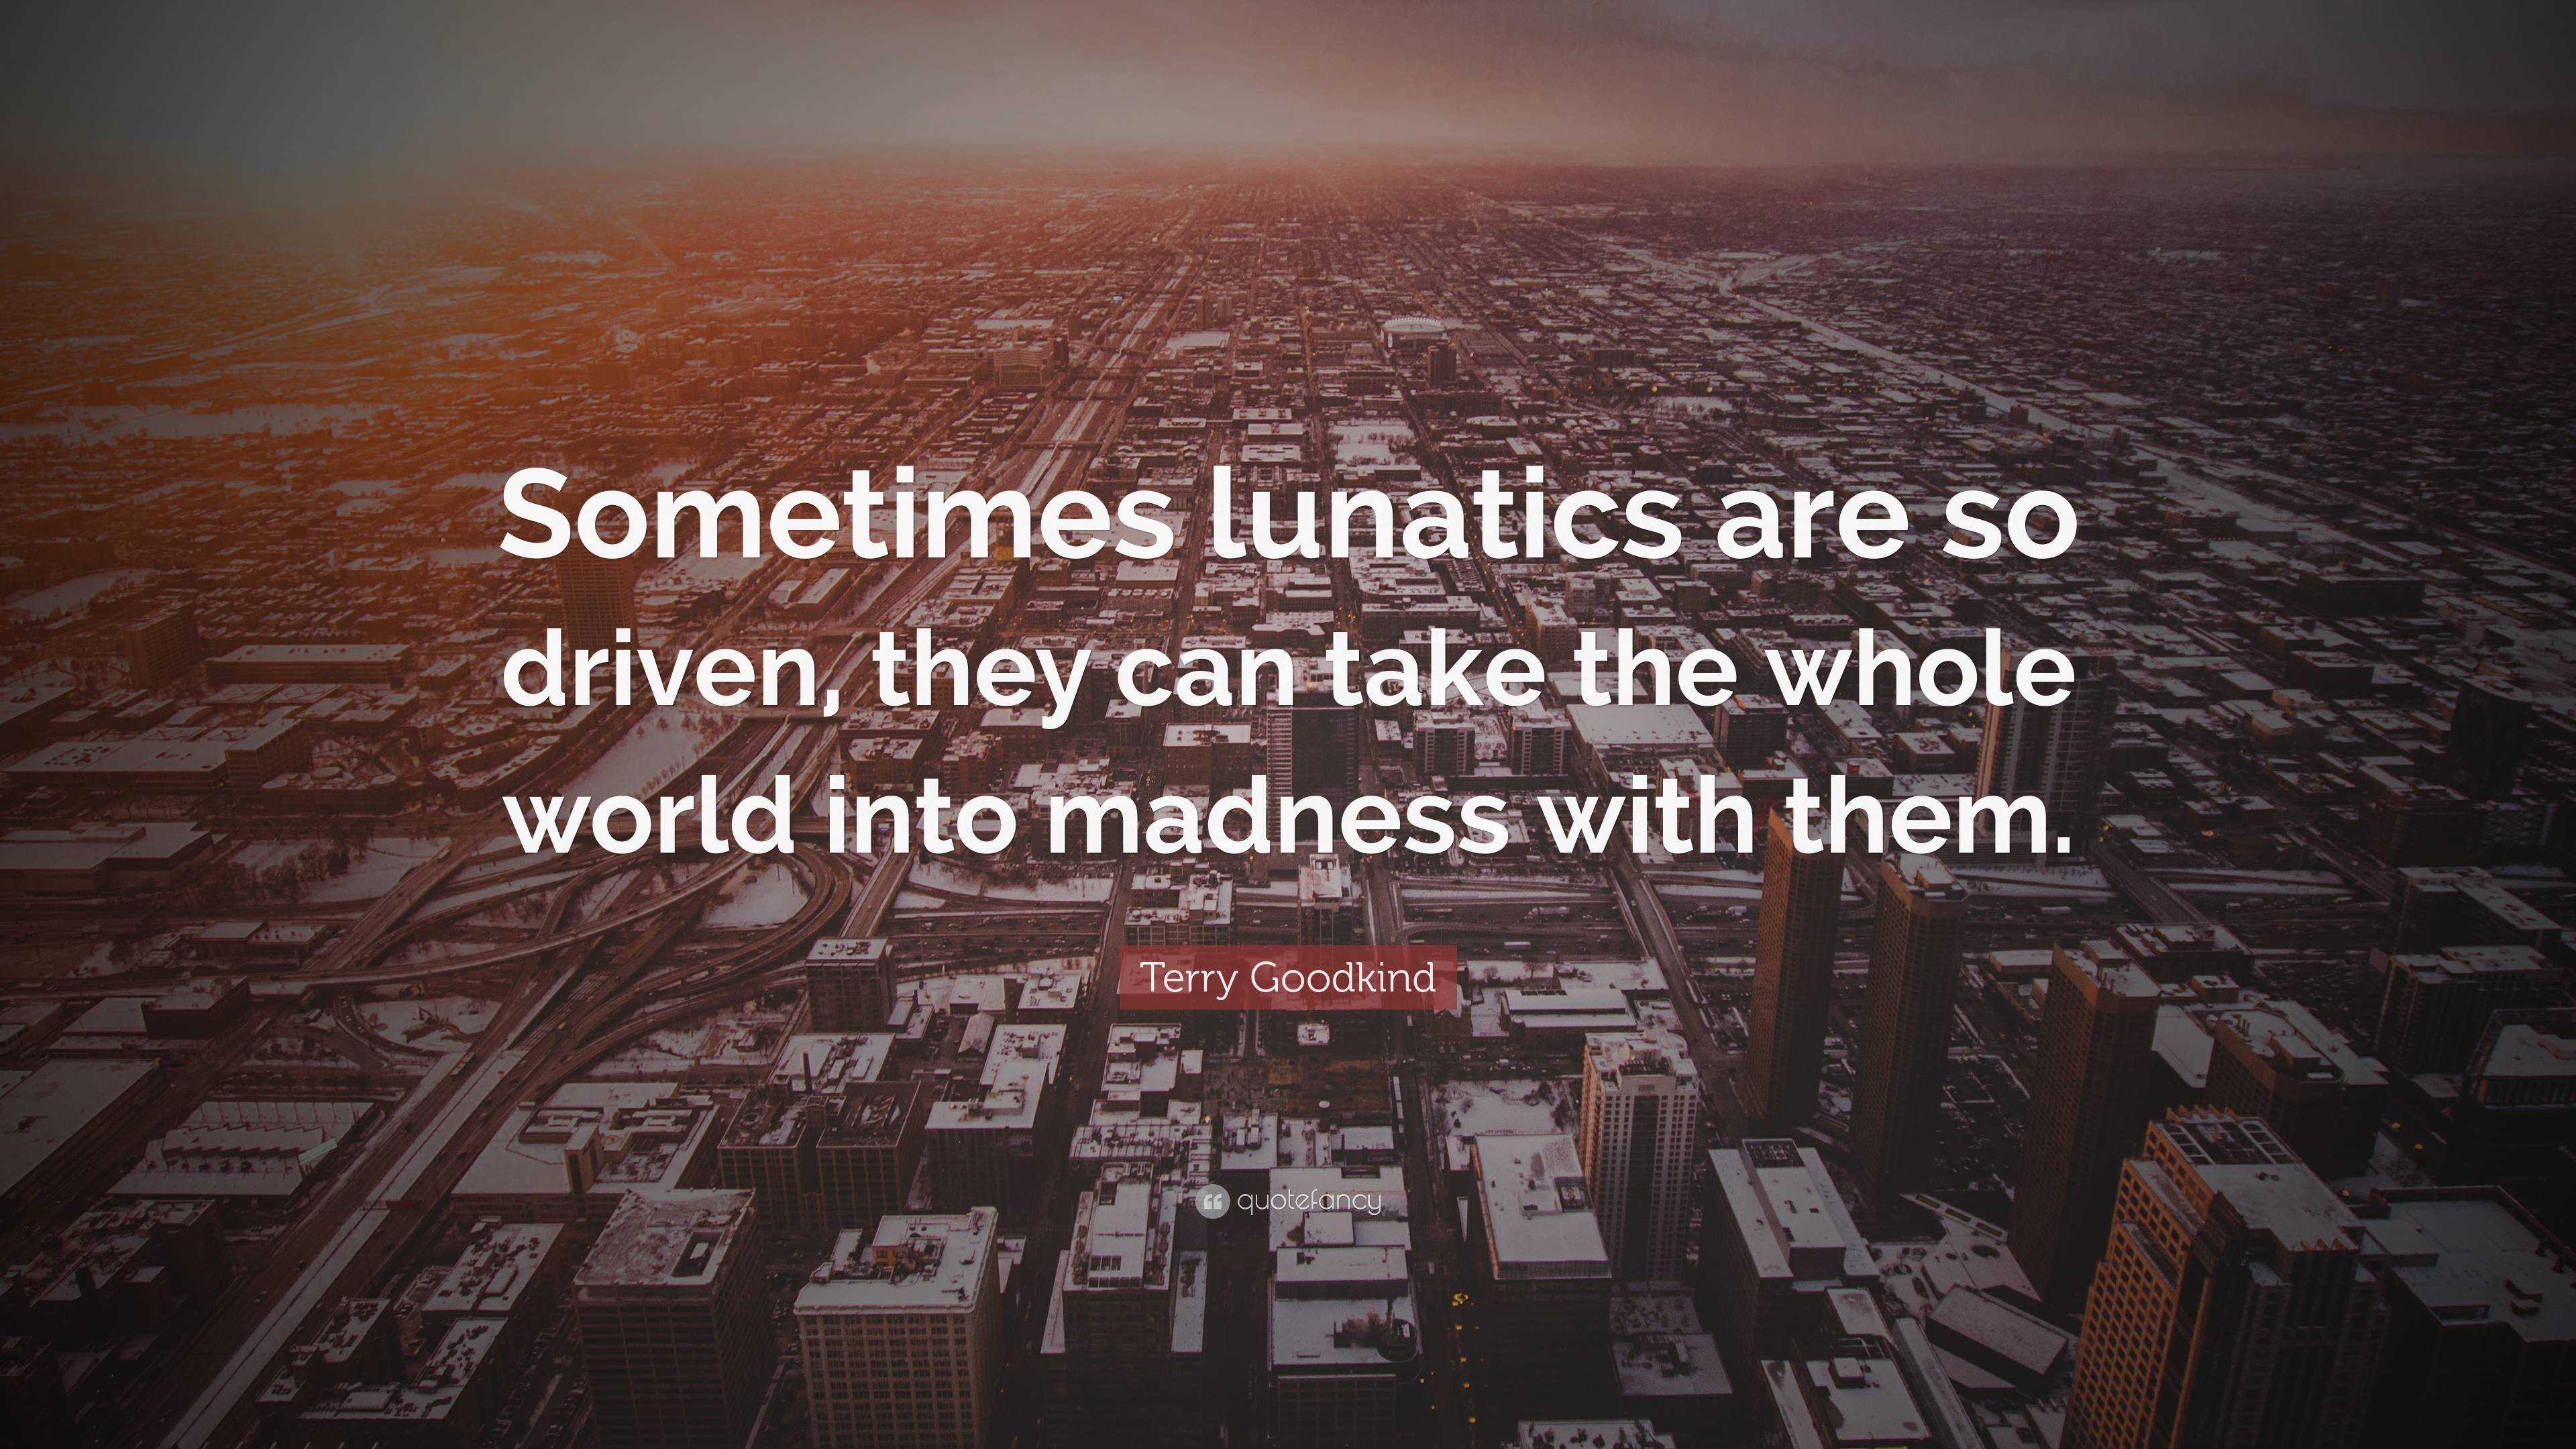 Terry Goodkind Quote “sometimes Lunatics Are So Driven They Can Take The Whole World Into